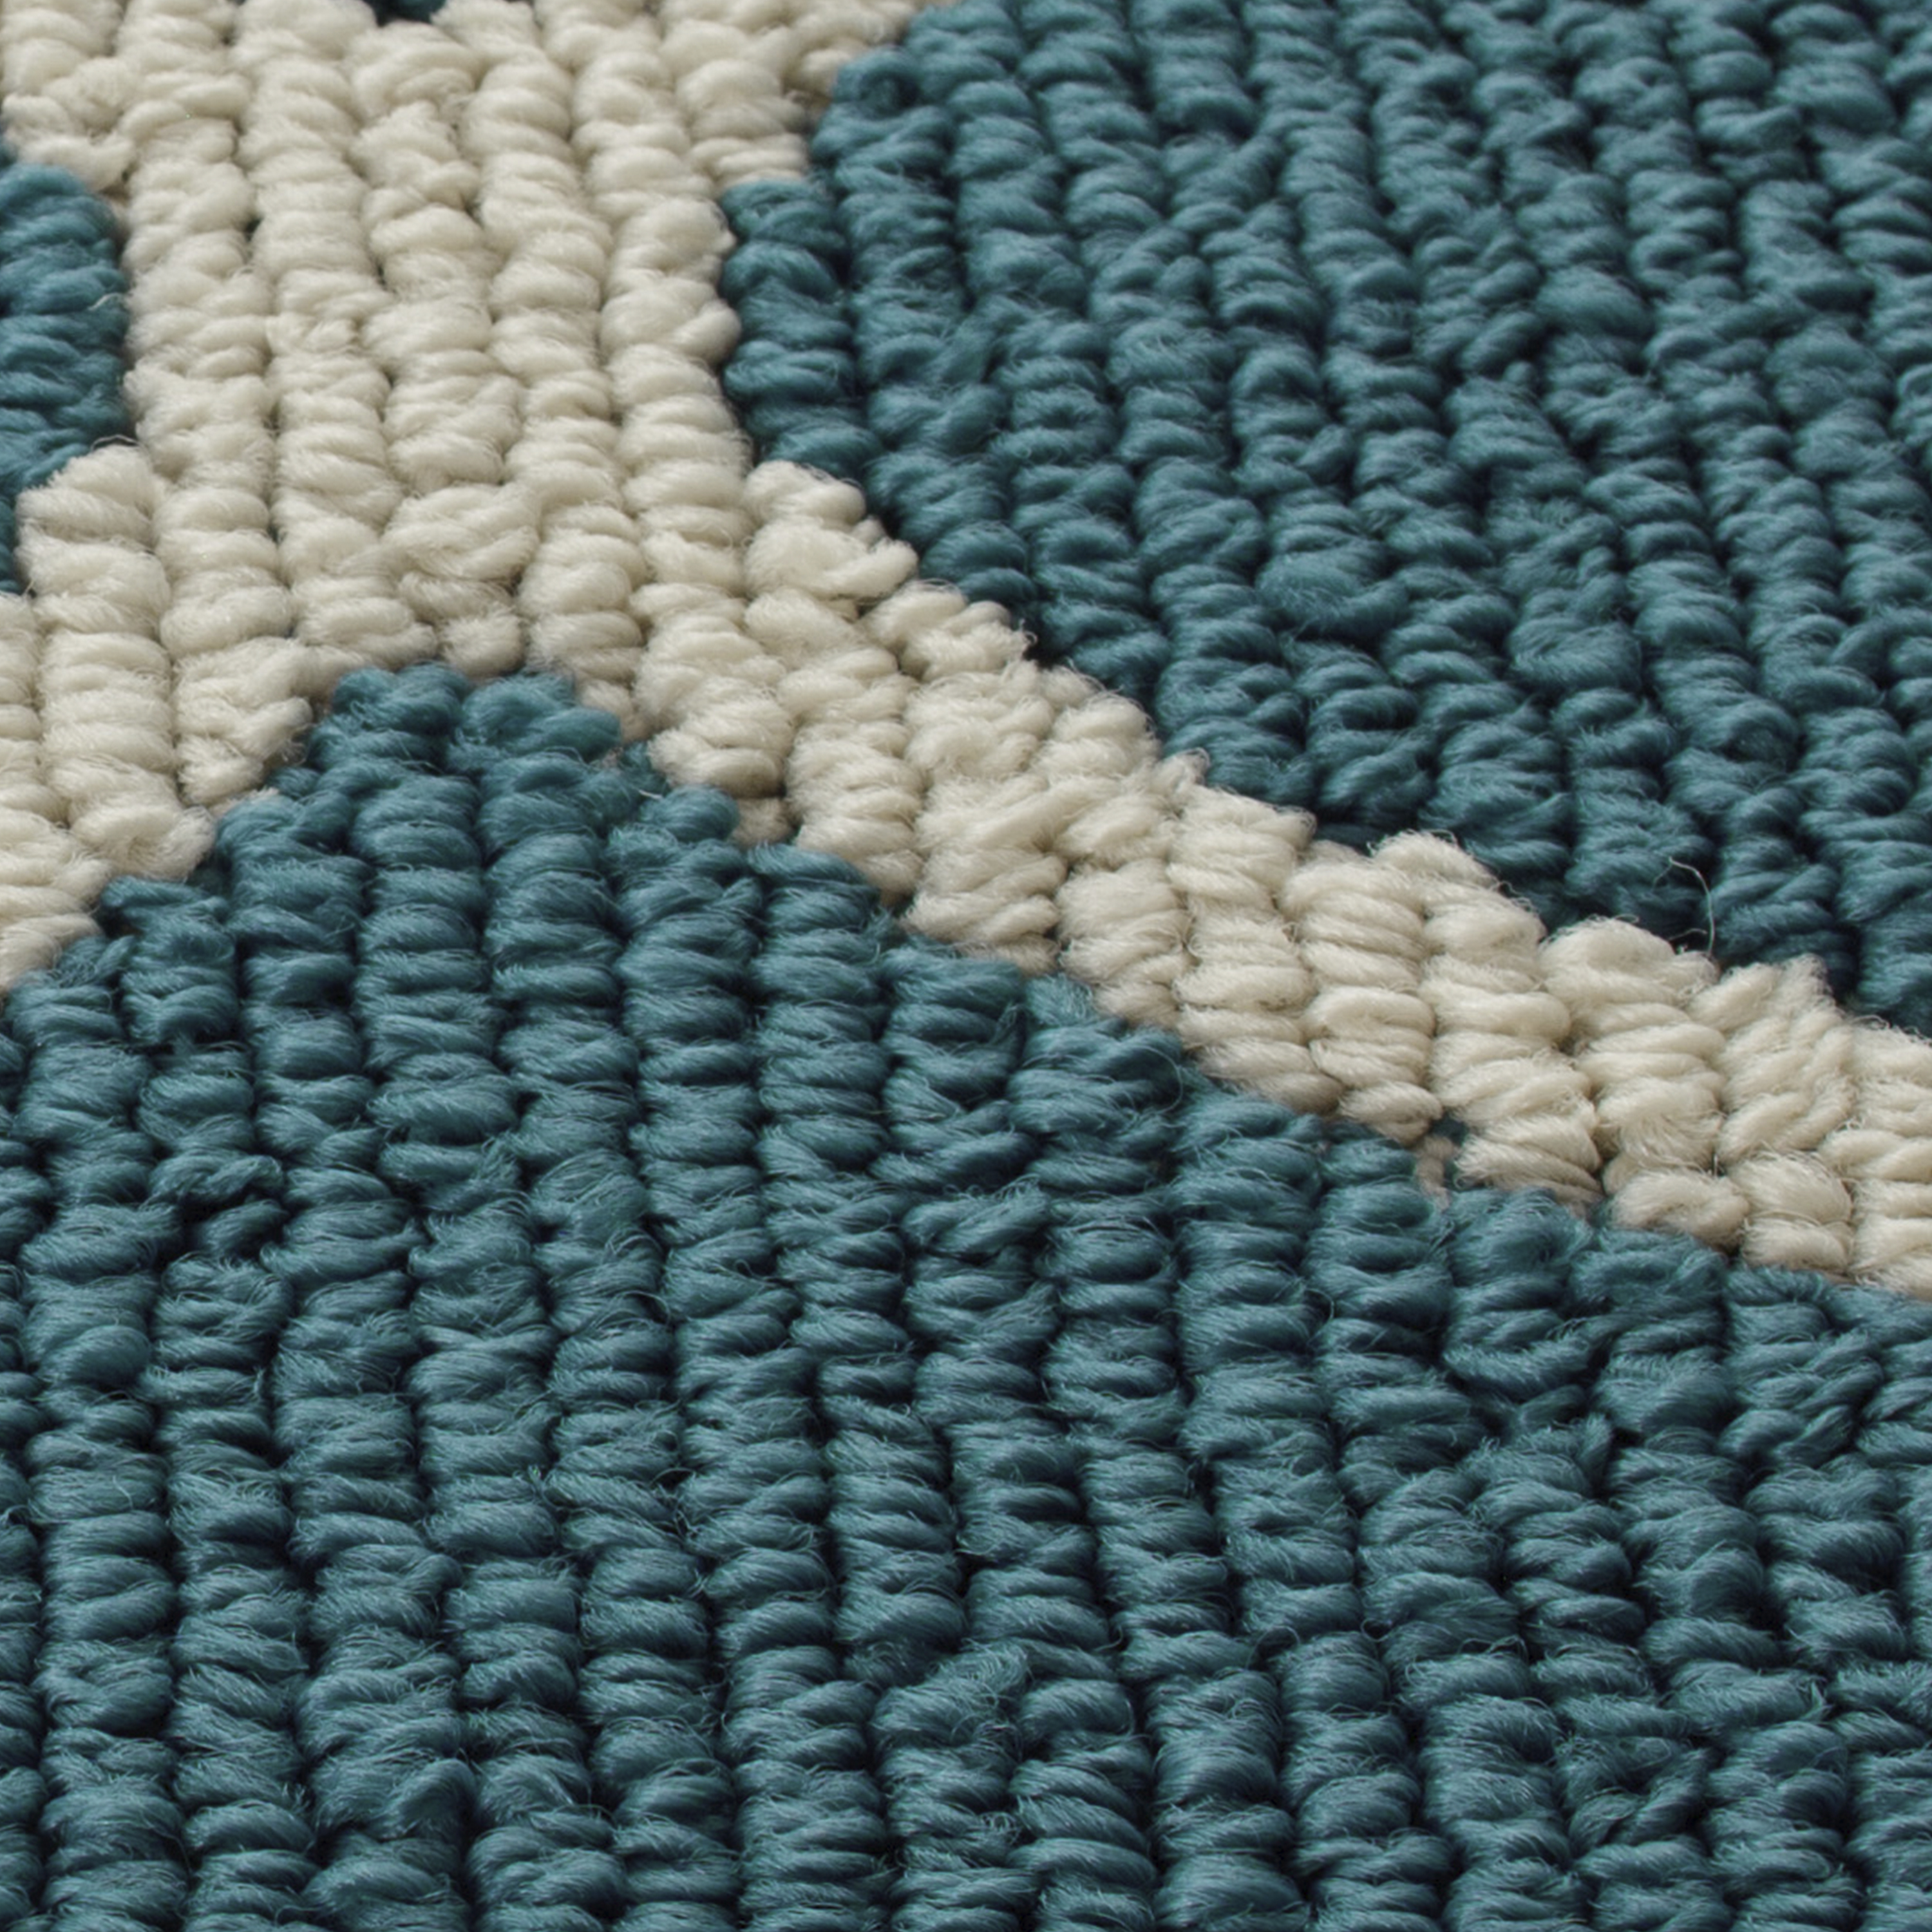 Maples Rugs Transitional Fretwork Teal Blue Living Room Indoor Area Rug, 5' x 7' - image 5 of 6